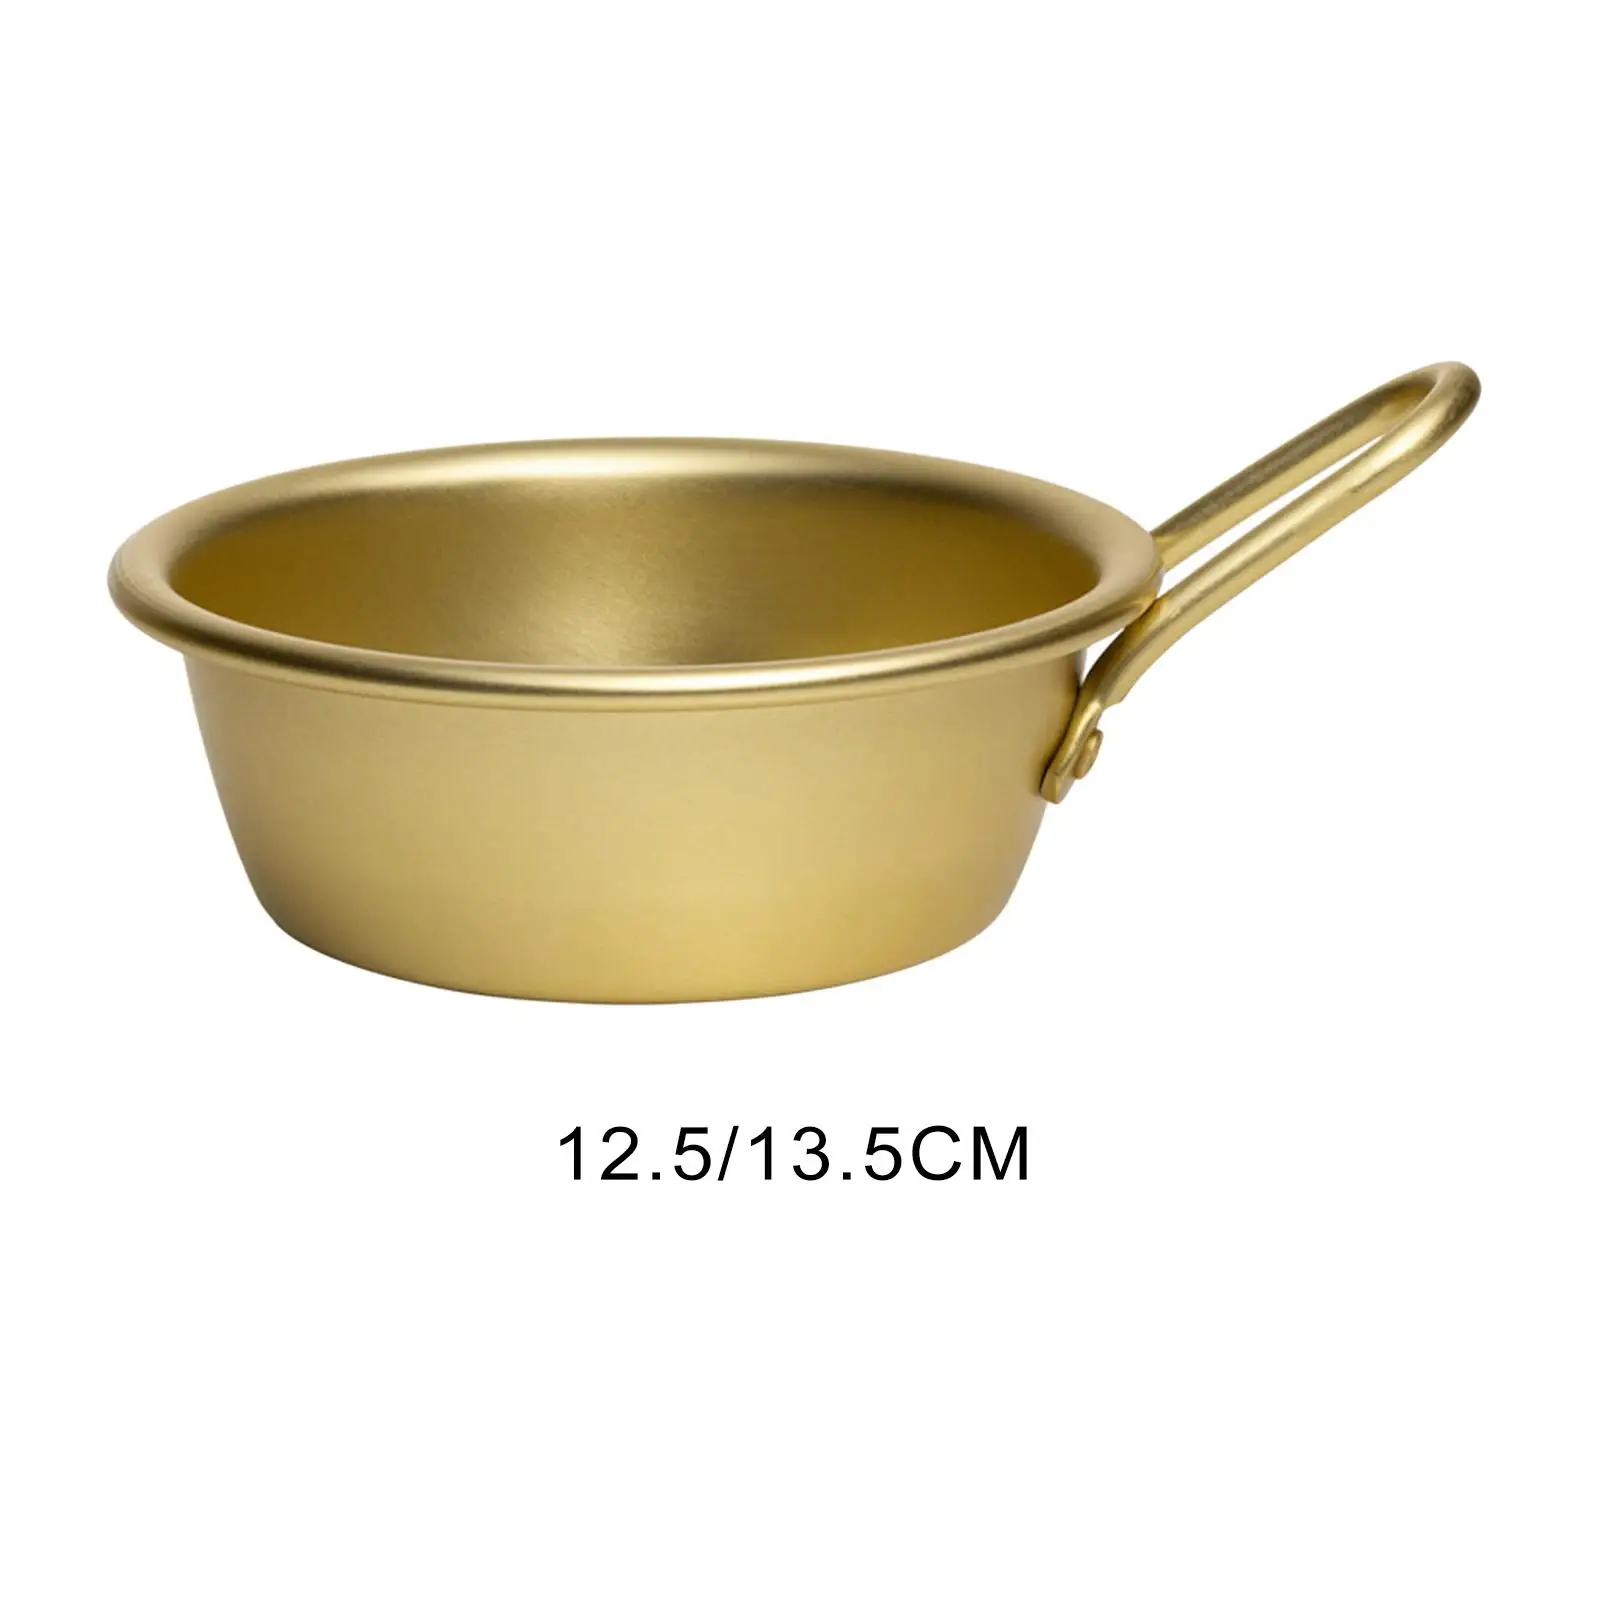 Korean Traditional Wine Bowl Golden with Handle Rice Wine Bowl Wine Cup Hiking Soup Dish Aluminum Cup Ramen Noodles Pot Camping